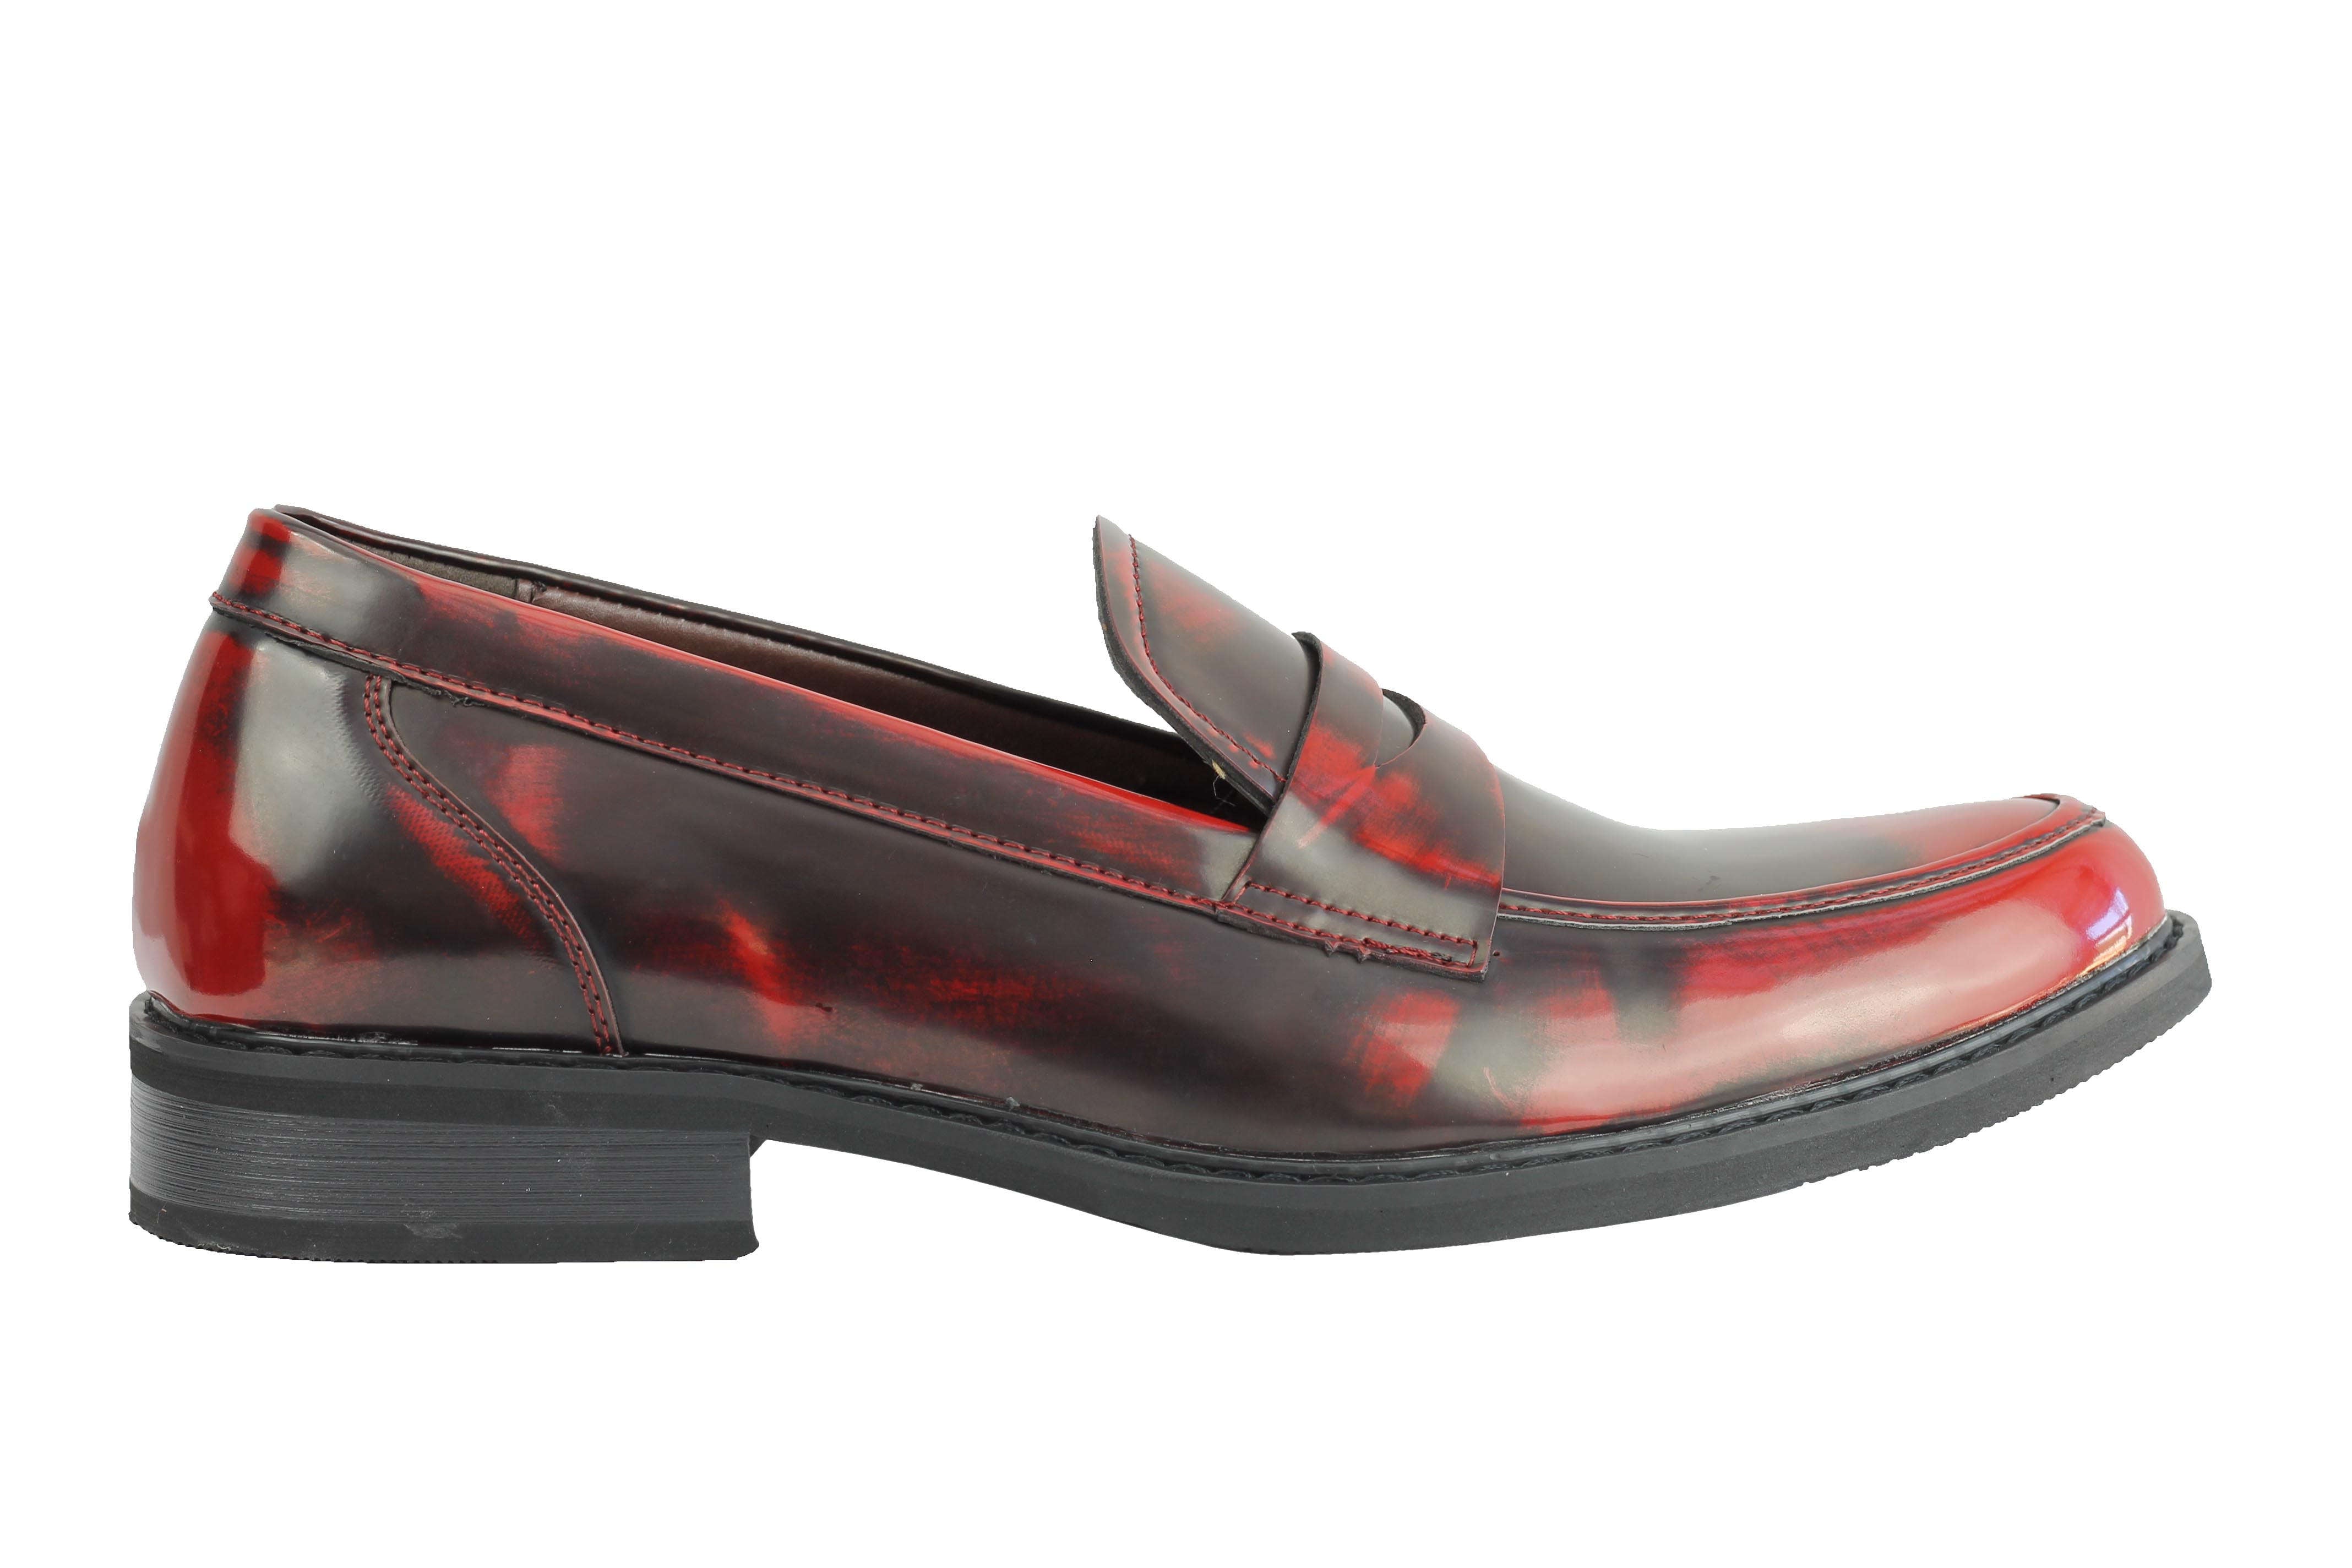 Retro Polished Leather Loafers In Maroon